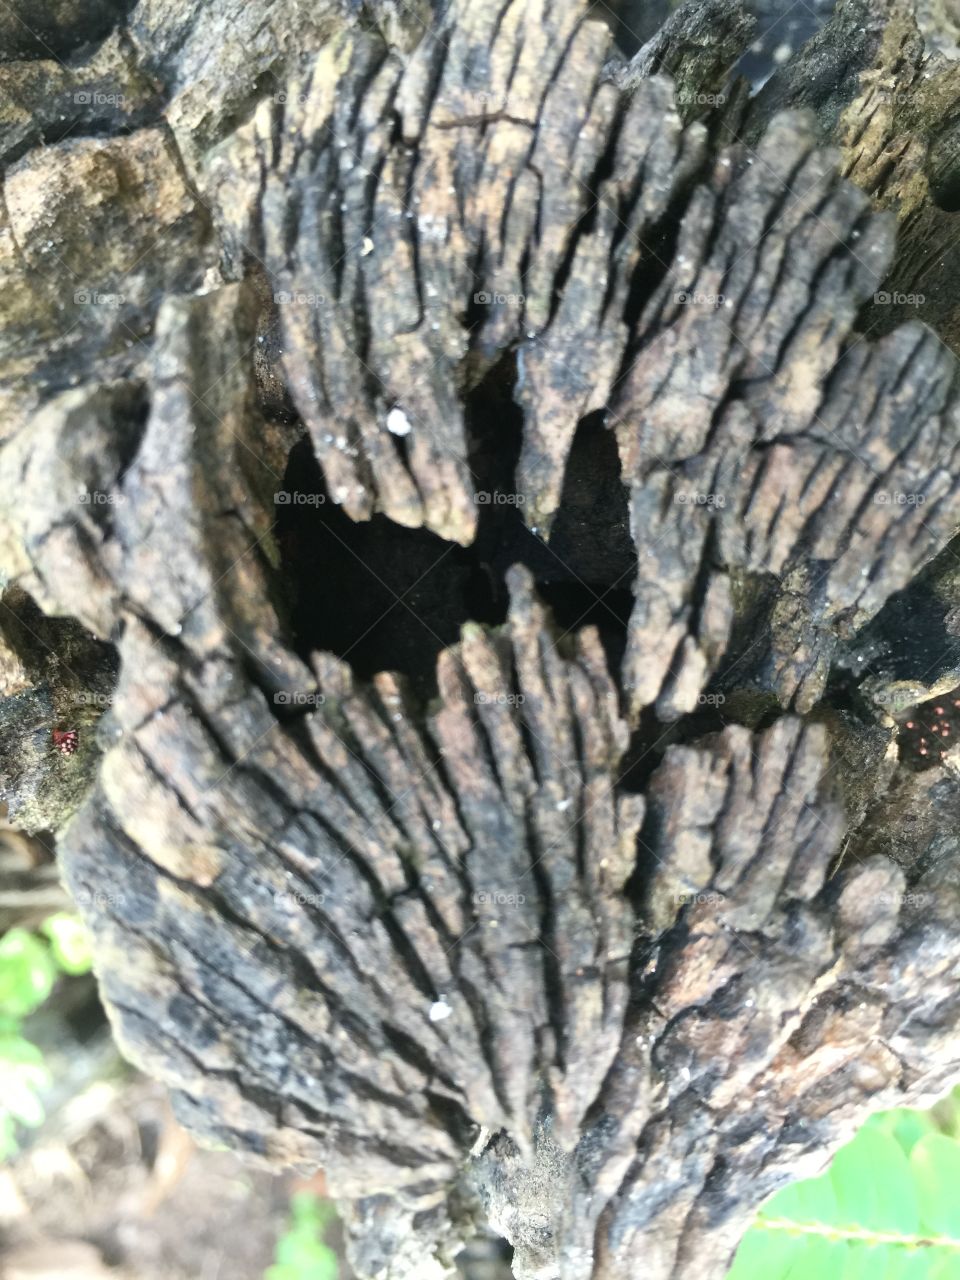 Rotten tree stump in the woods looks like a scary face